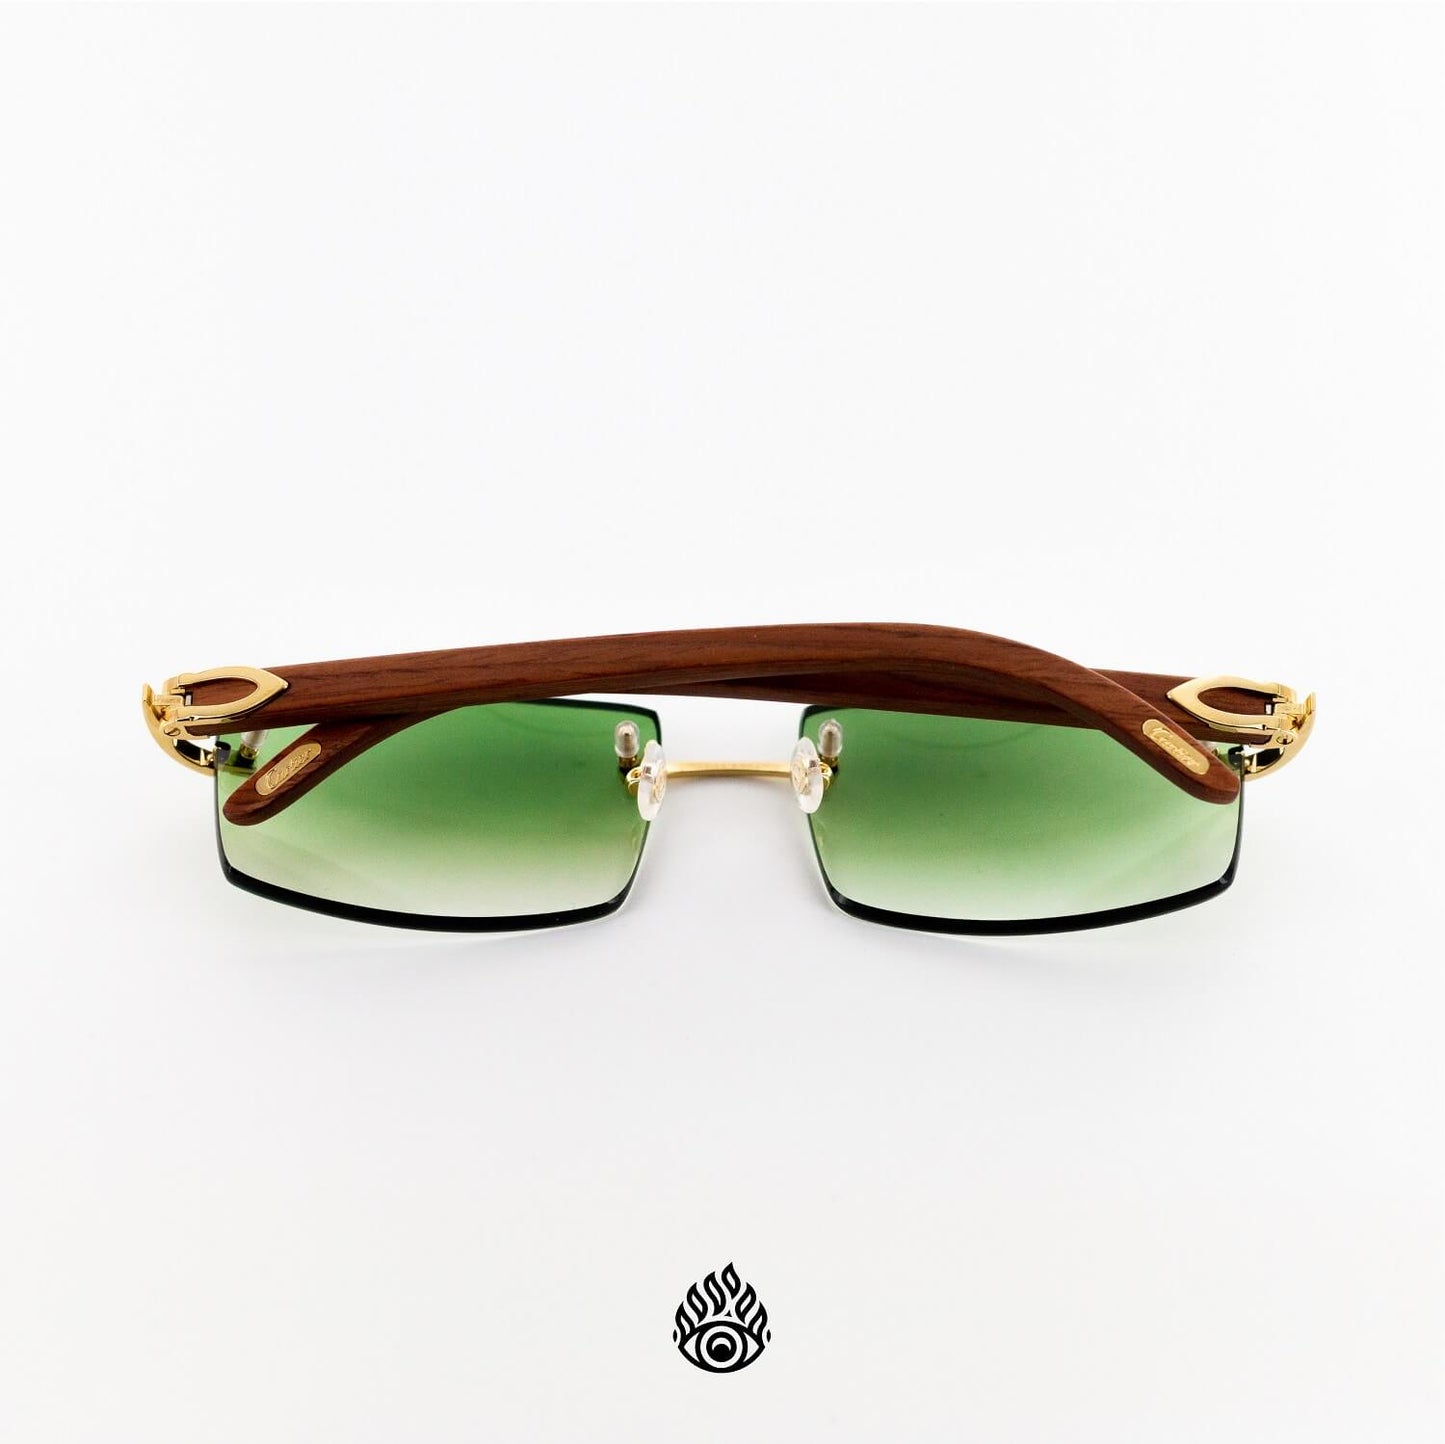 Cartier Light Wood Glasses with Gold C Decor and Green Lens